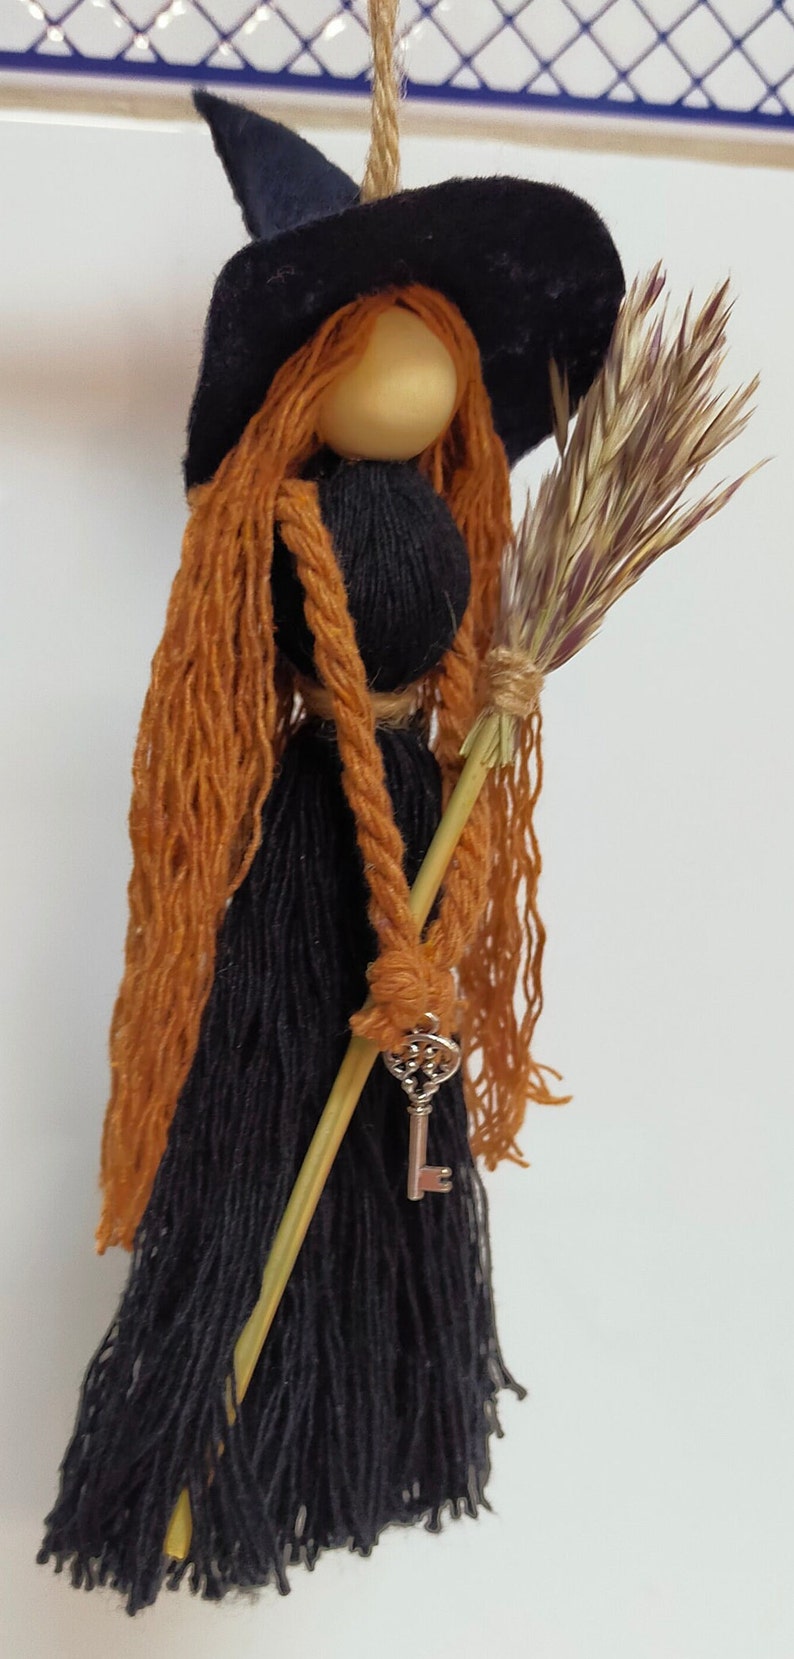 Kitchen Witch Wizard Handmade Witch Protection Luck Witch Broom, Vintage Design New Home Gift Housewarming, Boho nursery decor, Macrame Doll image 4